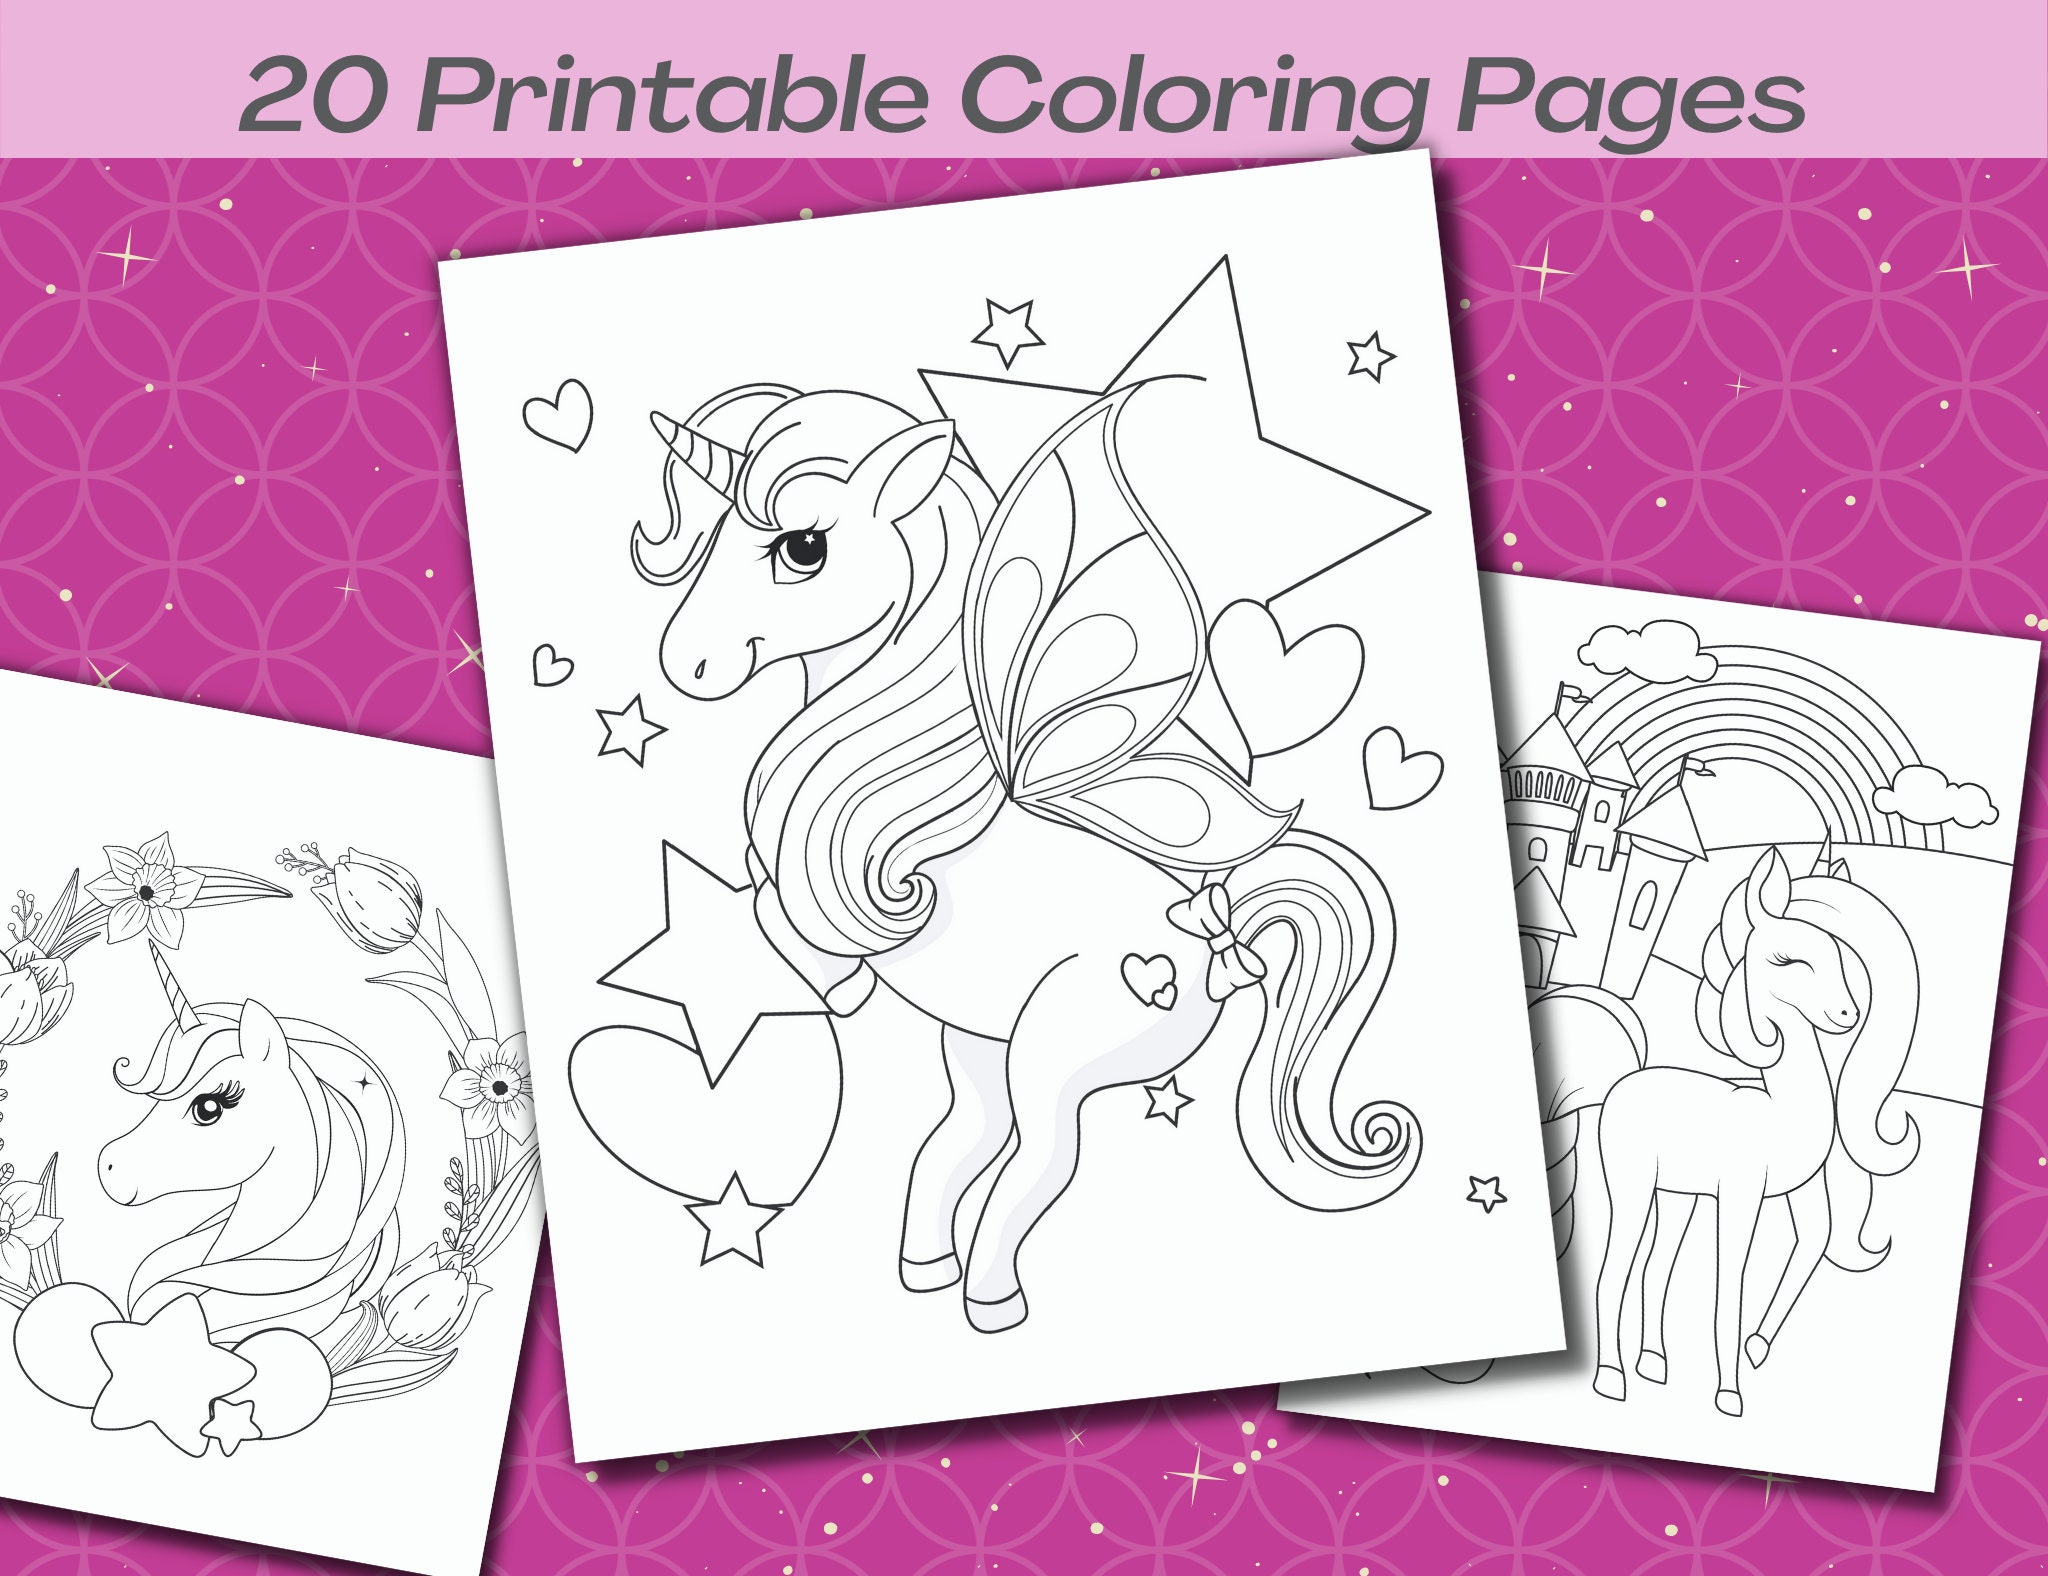 Unicorn Coloring Pages   20 Printable Unicorn Coloring Pages, Girls  Birthday Party Activity, Unicorn Birthday, Coloring For Kids